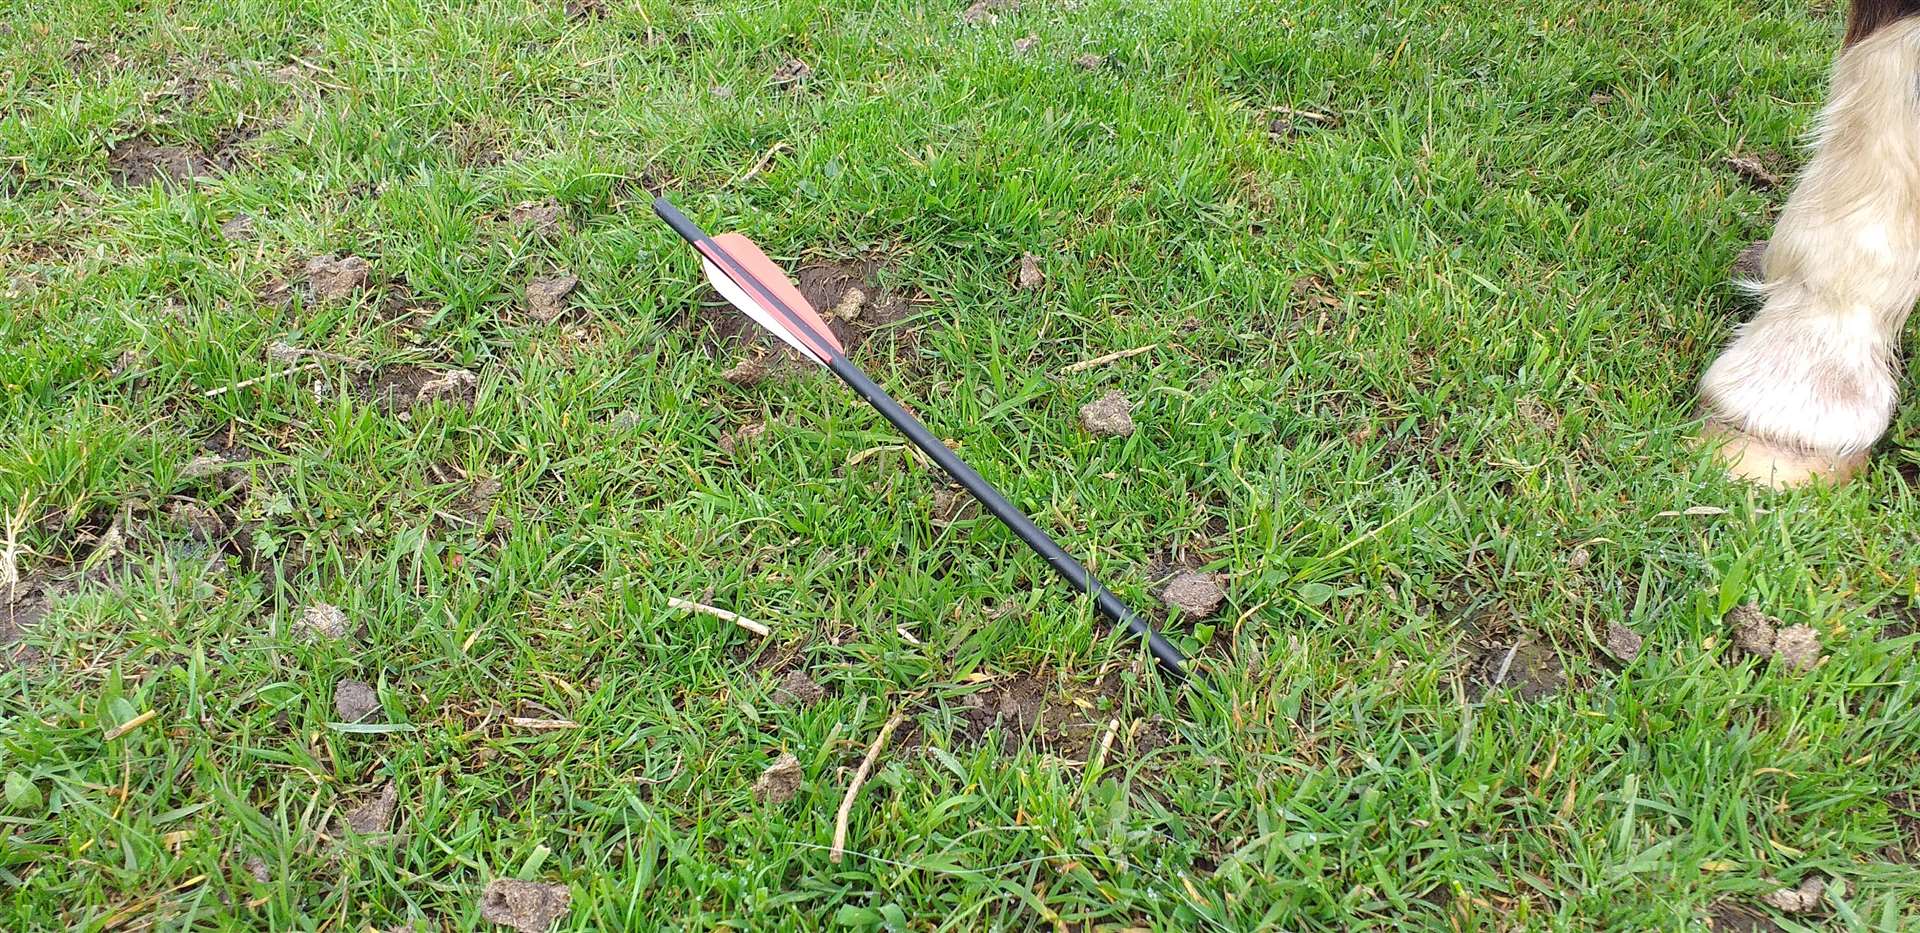 The crossbow bolt discovered in the field at Knockglass Farm and Stables.